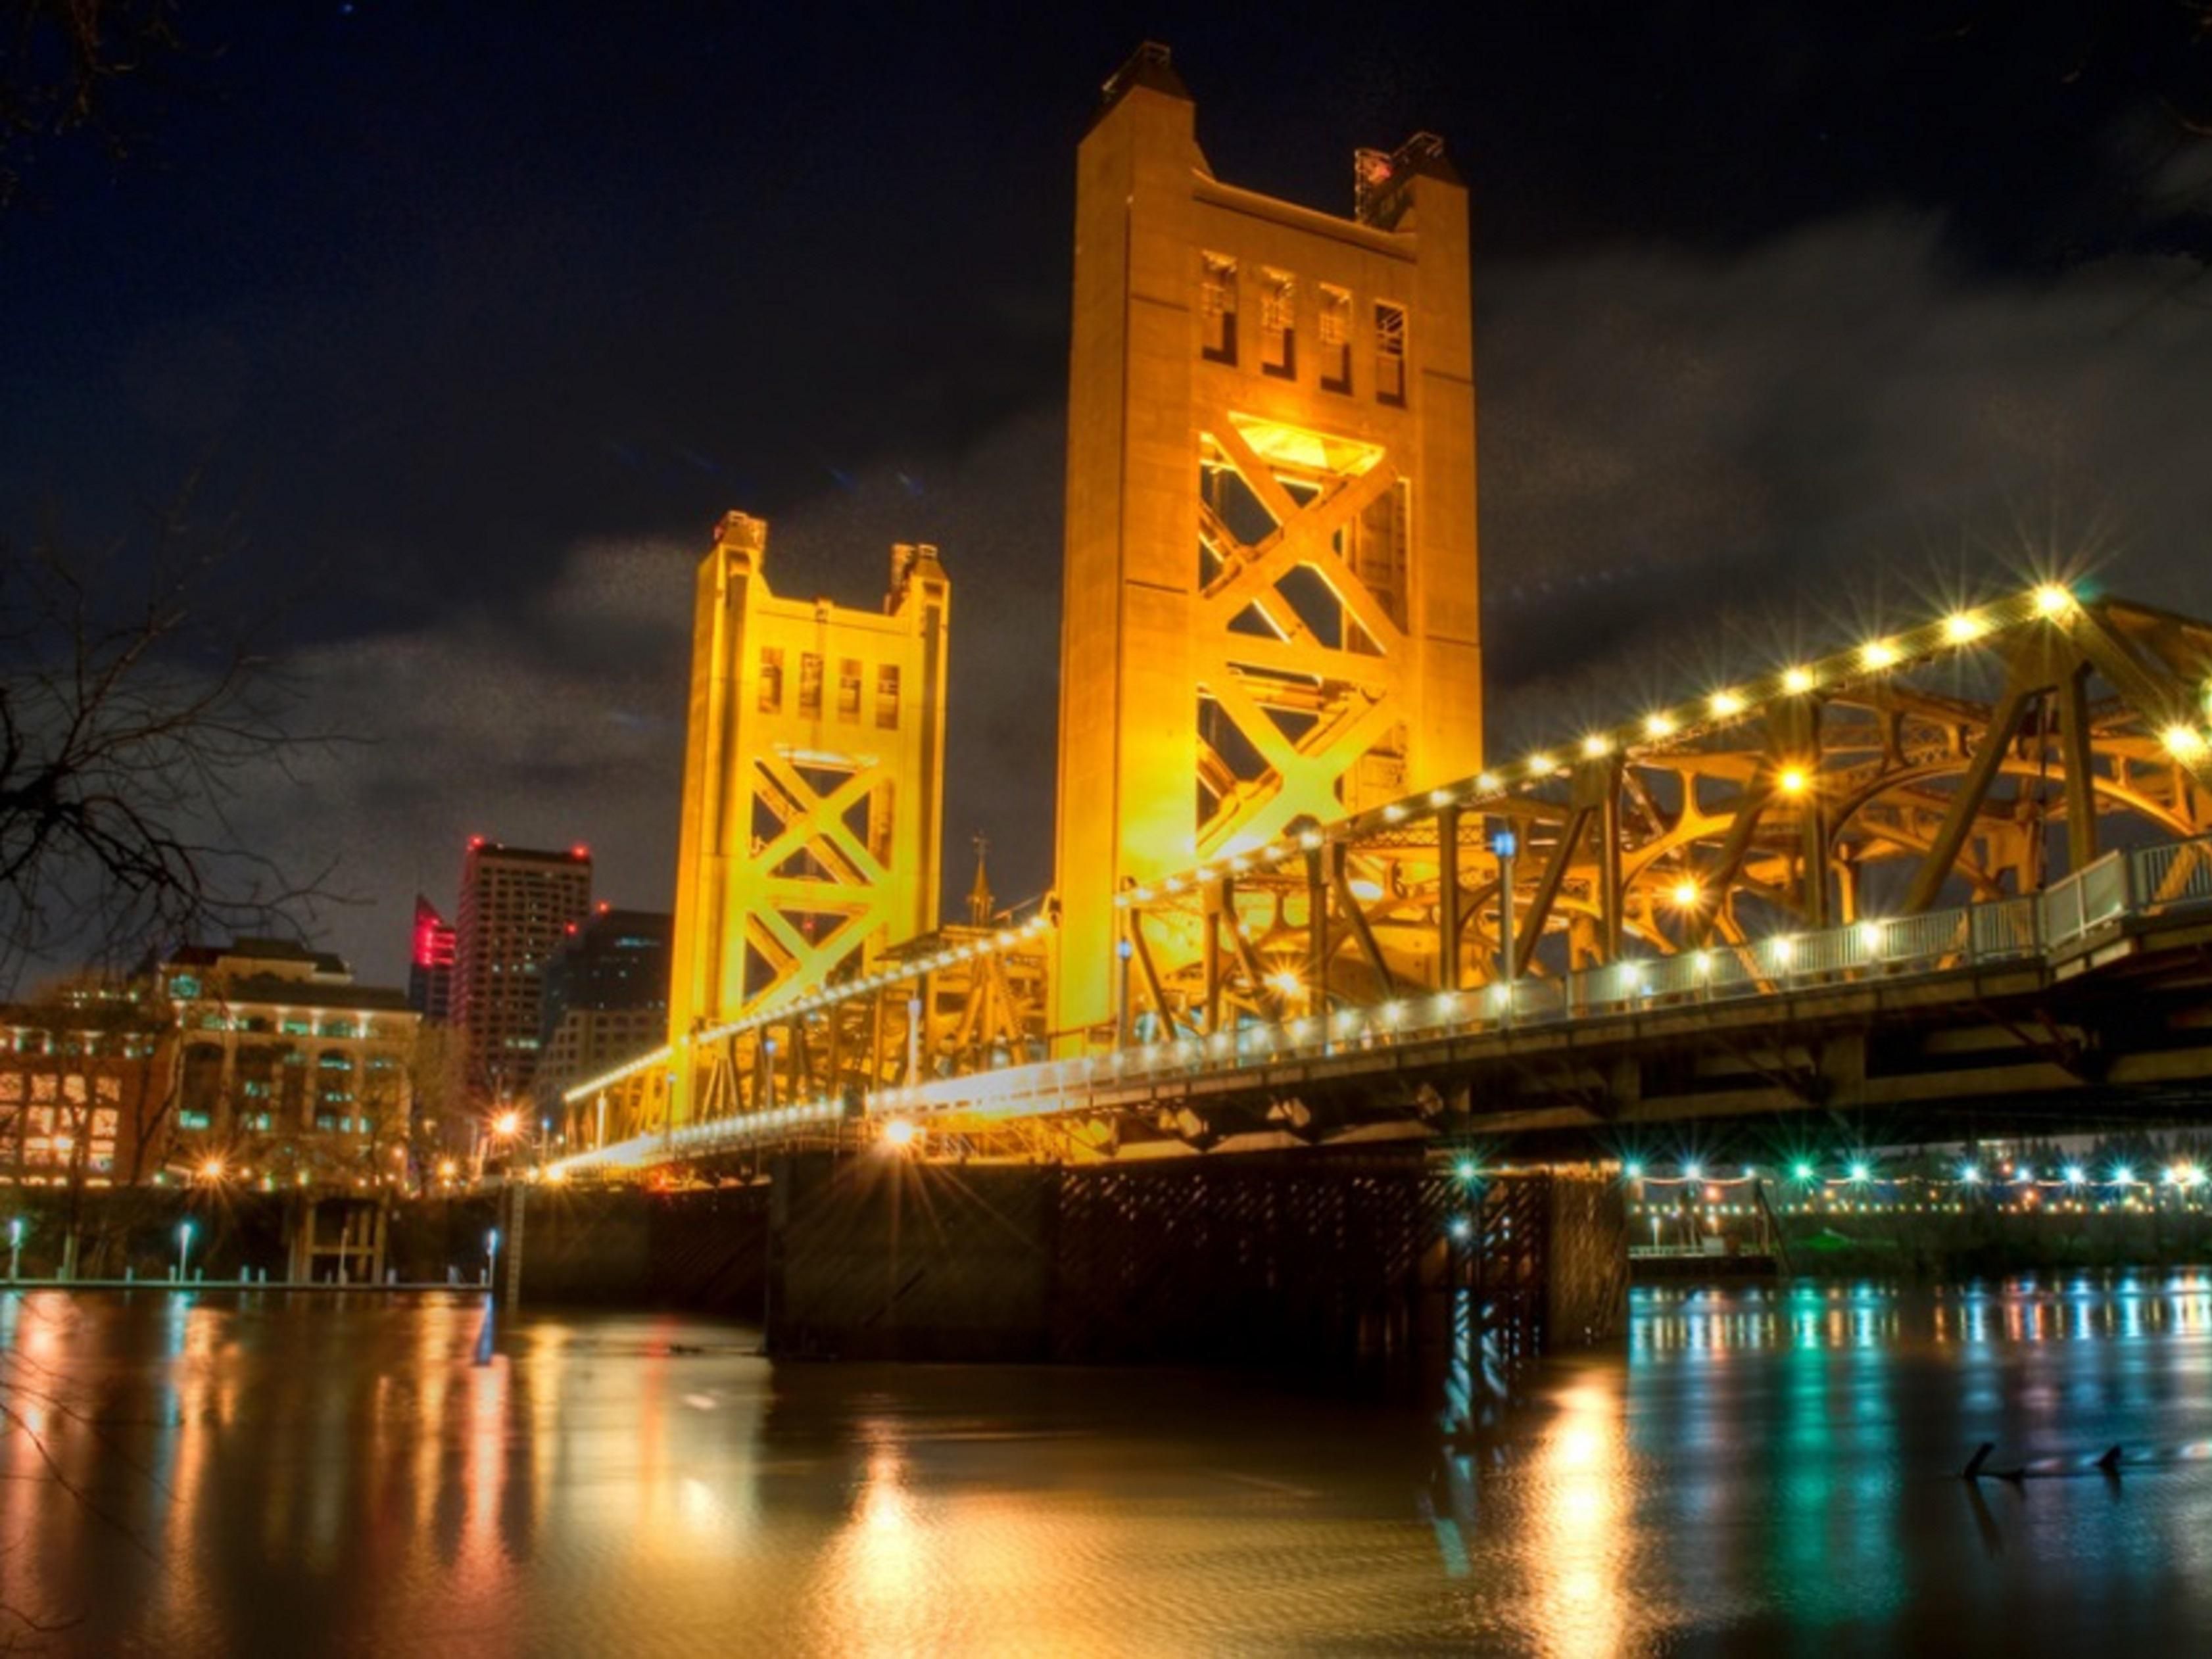 Enjoy a getaway at our downtown Sacramento hotel. We’re within walking distance of restaurants, shopping, performing arts, and top Sacramento attractions, including Golden 1 Center, home of the Sacramento Kings, DOCO - Downtown Commons, Old Sacramento Waterfront, SAFE Credit Union Convention Center, and the Crocker Art Museum.